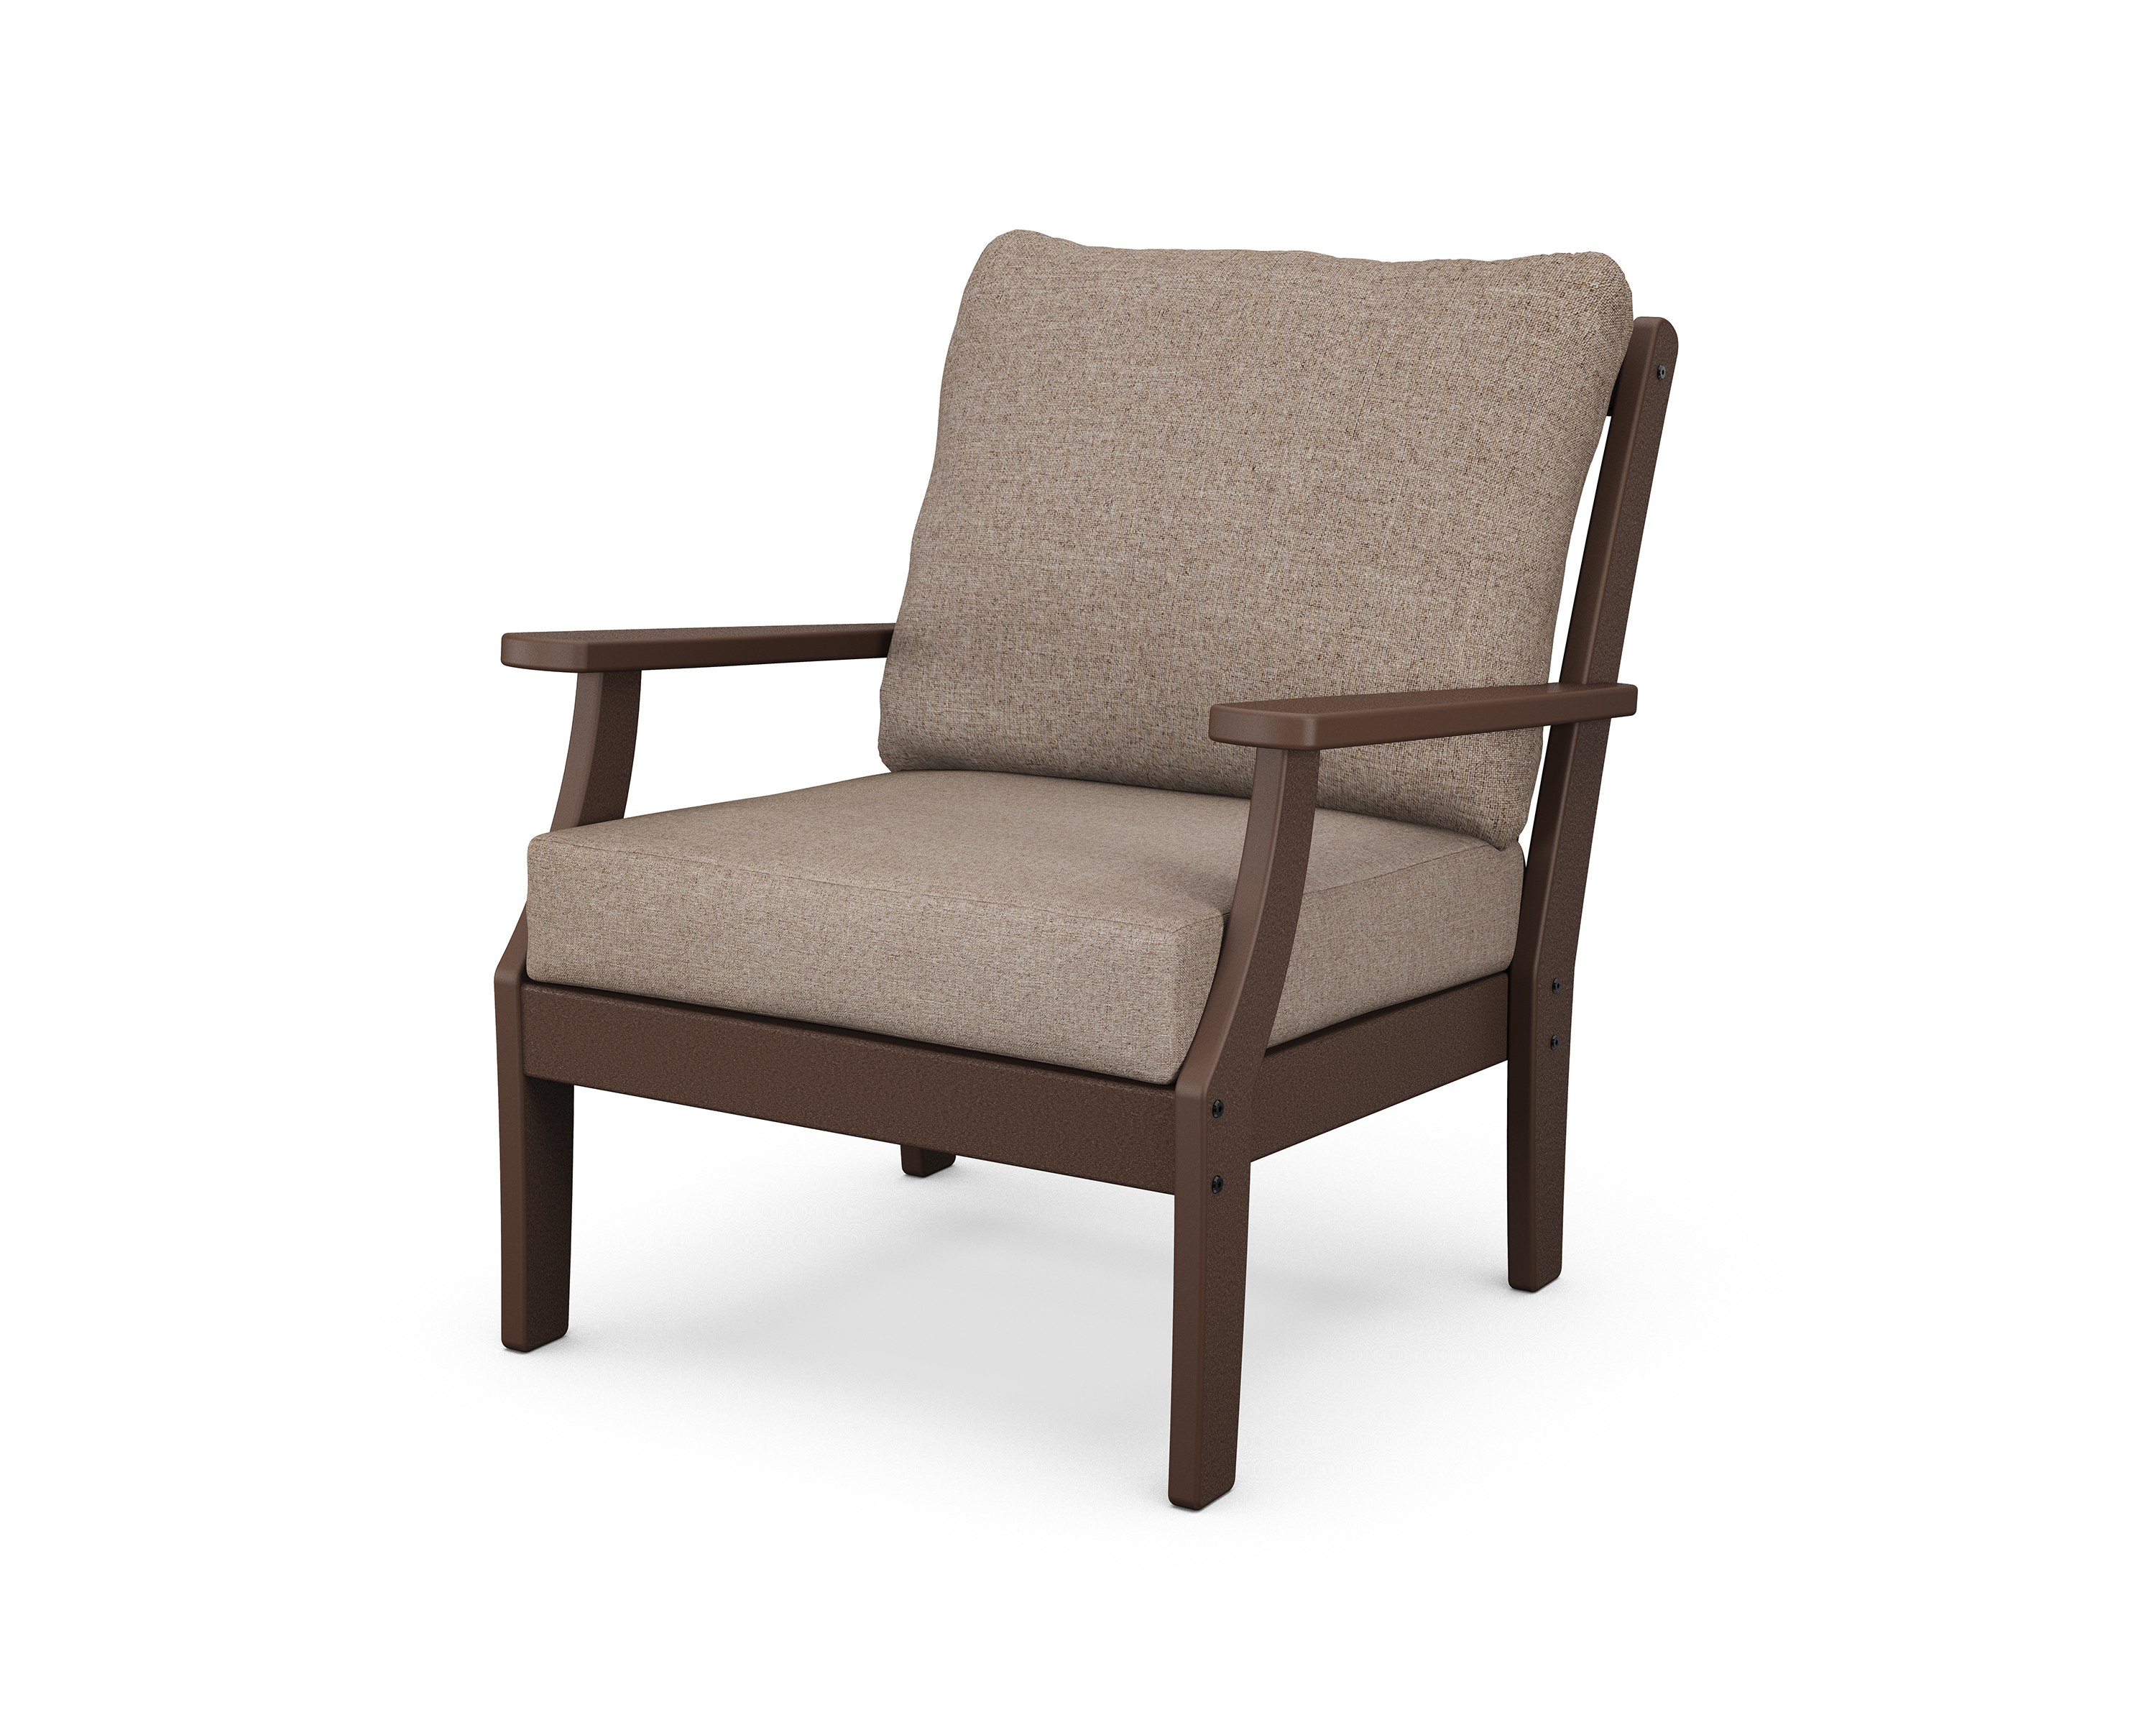 braxton deep seating chair in mahogany / spiced burlap product image